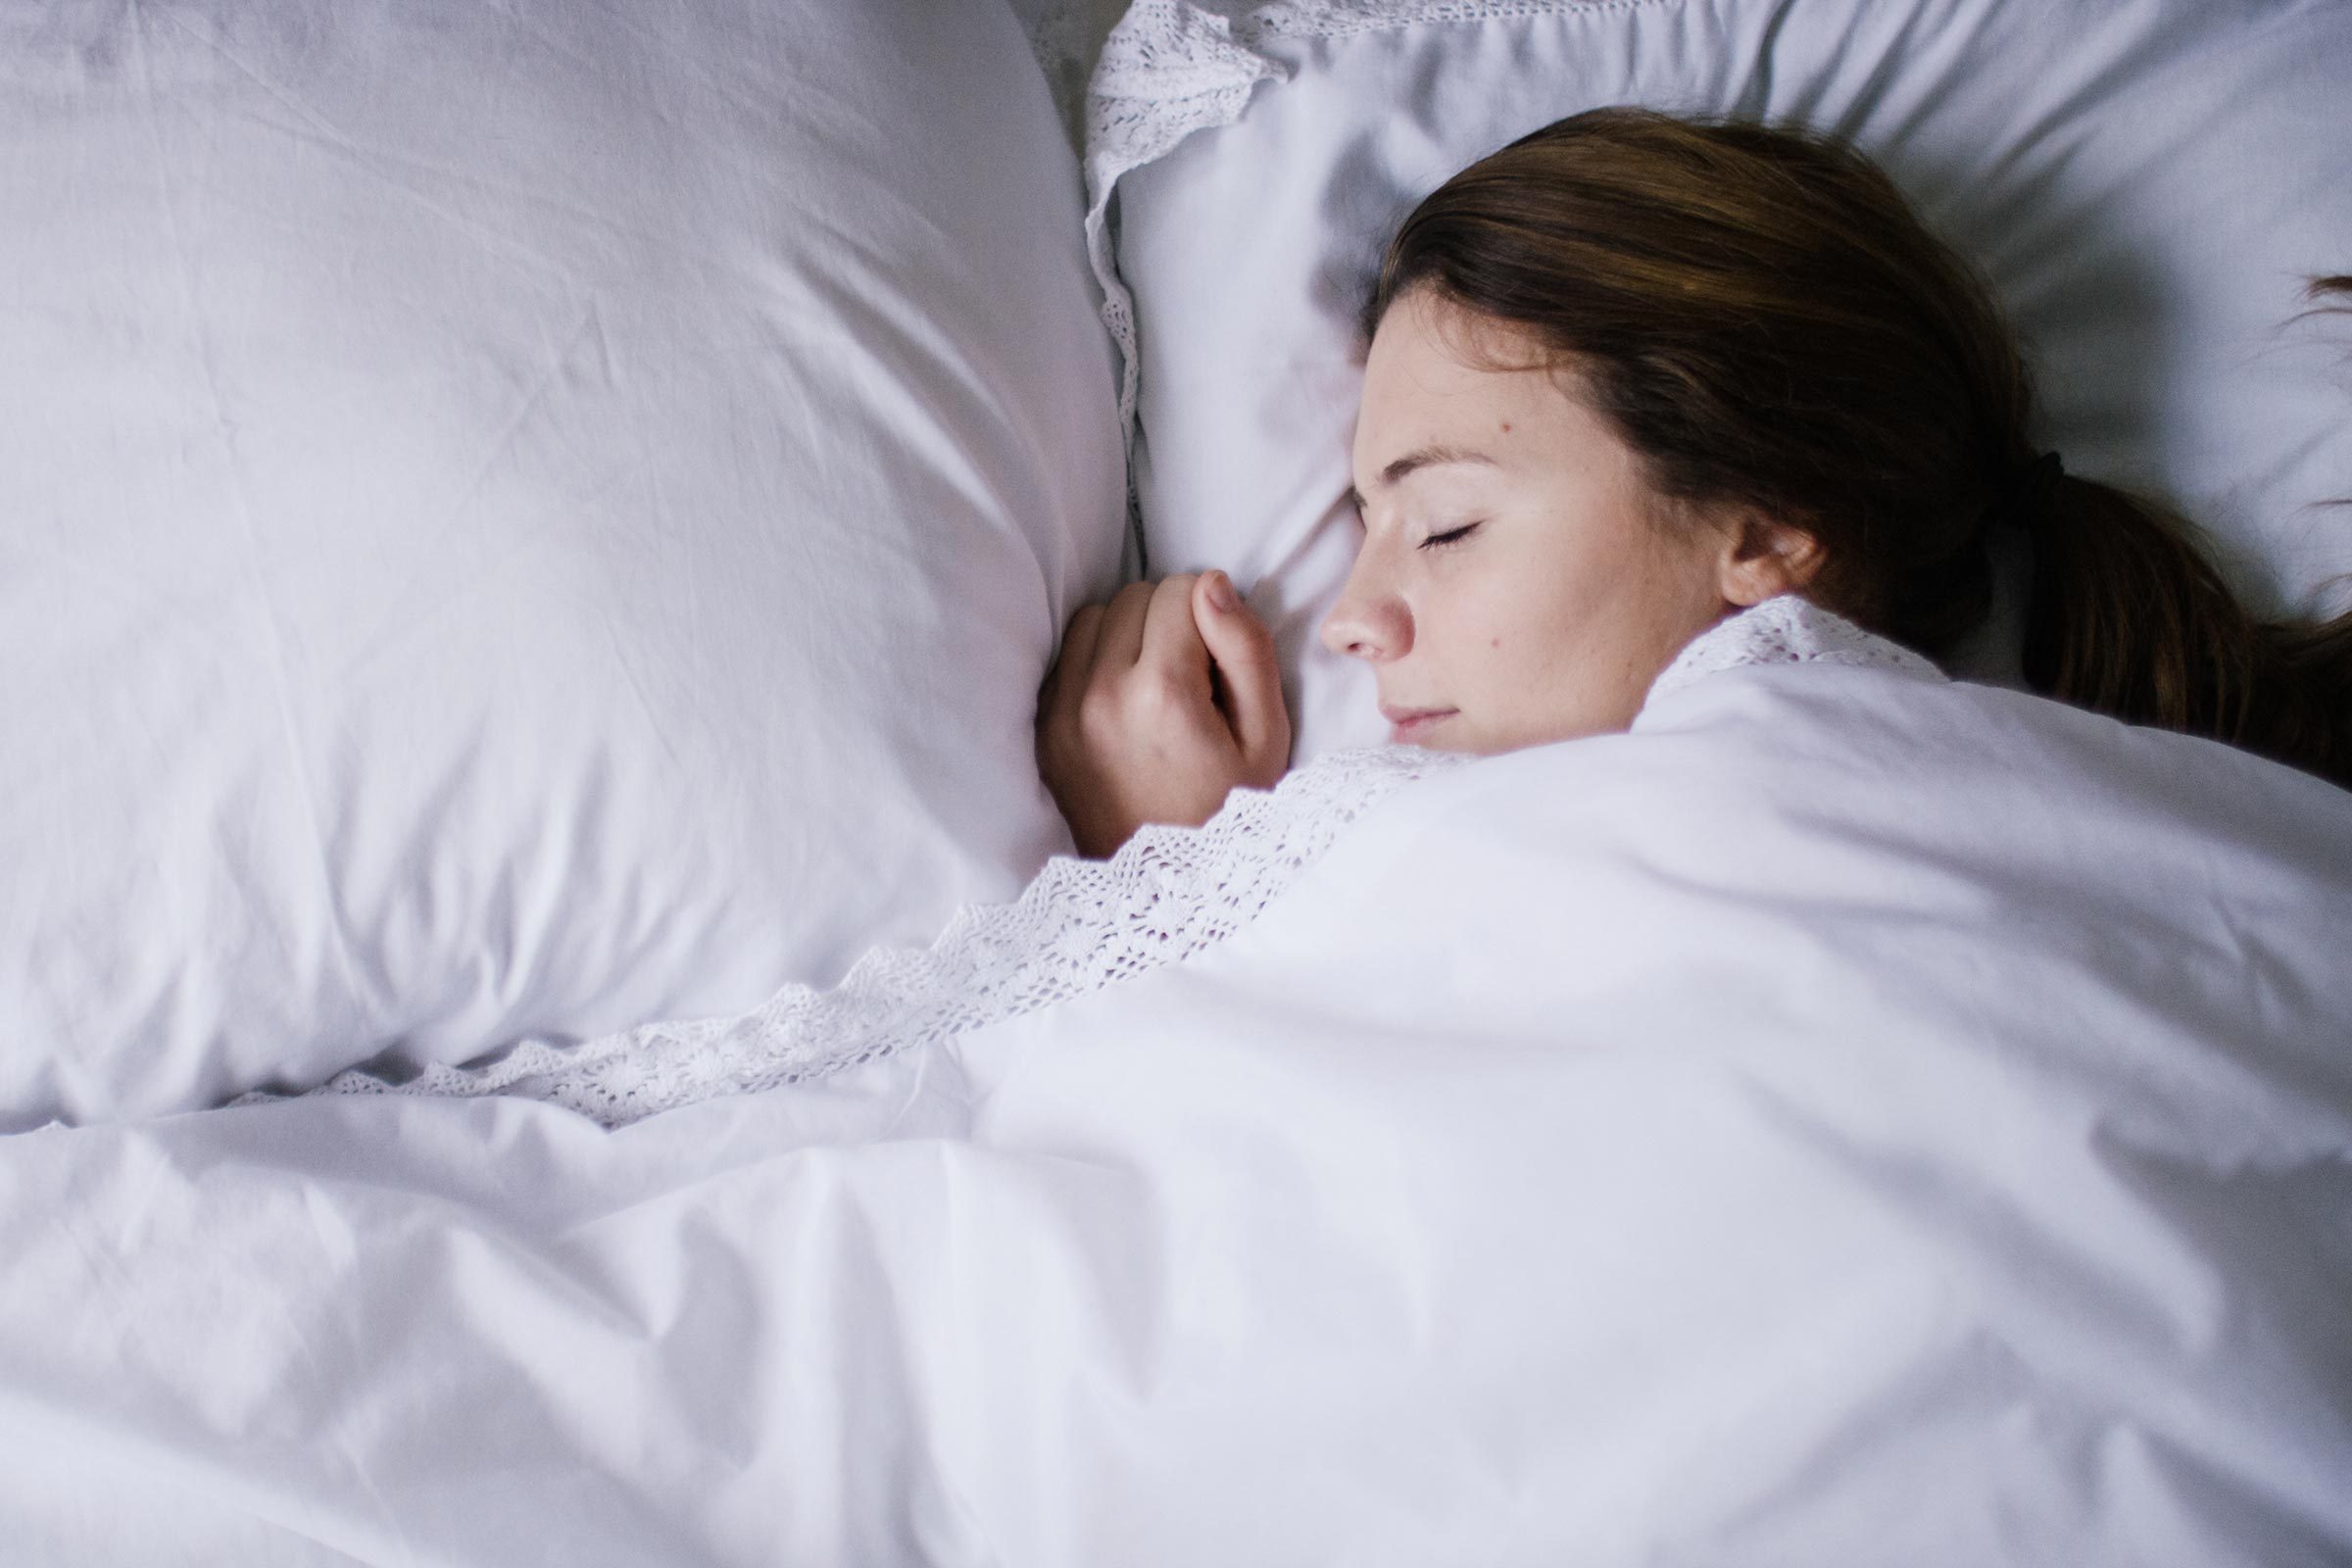 This Amount of Sleep Could Be Dangerous for Your Arteries